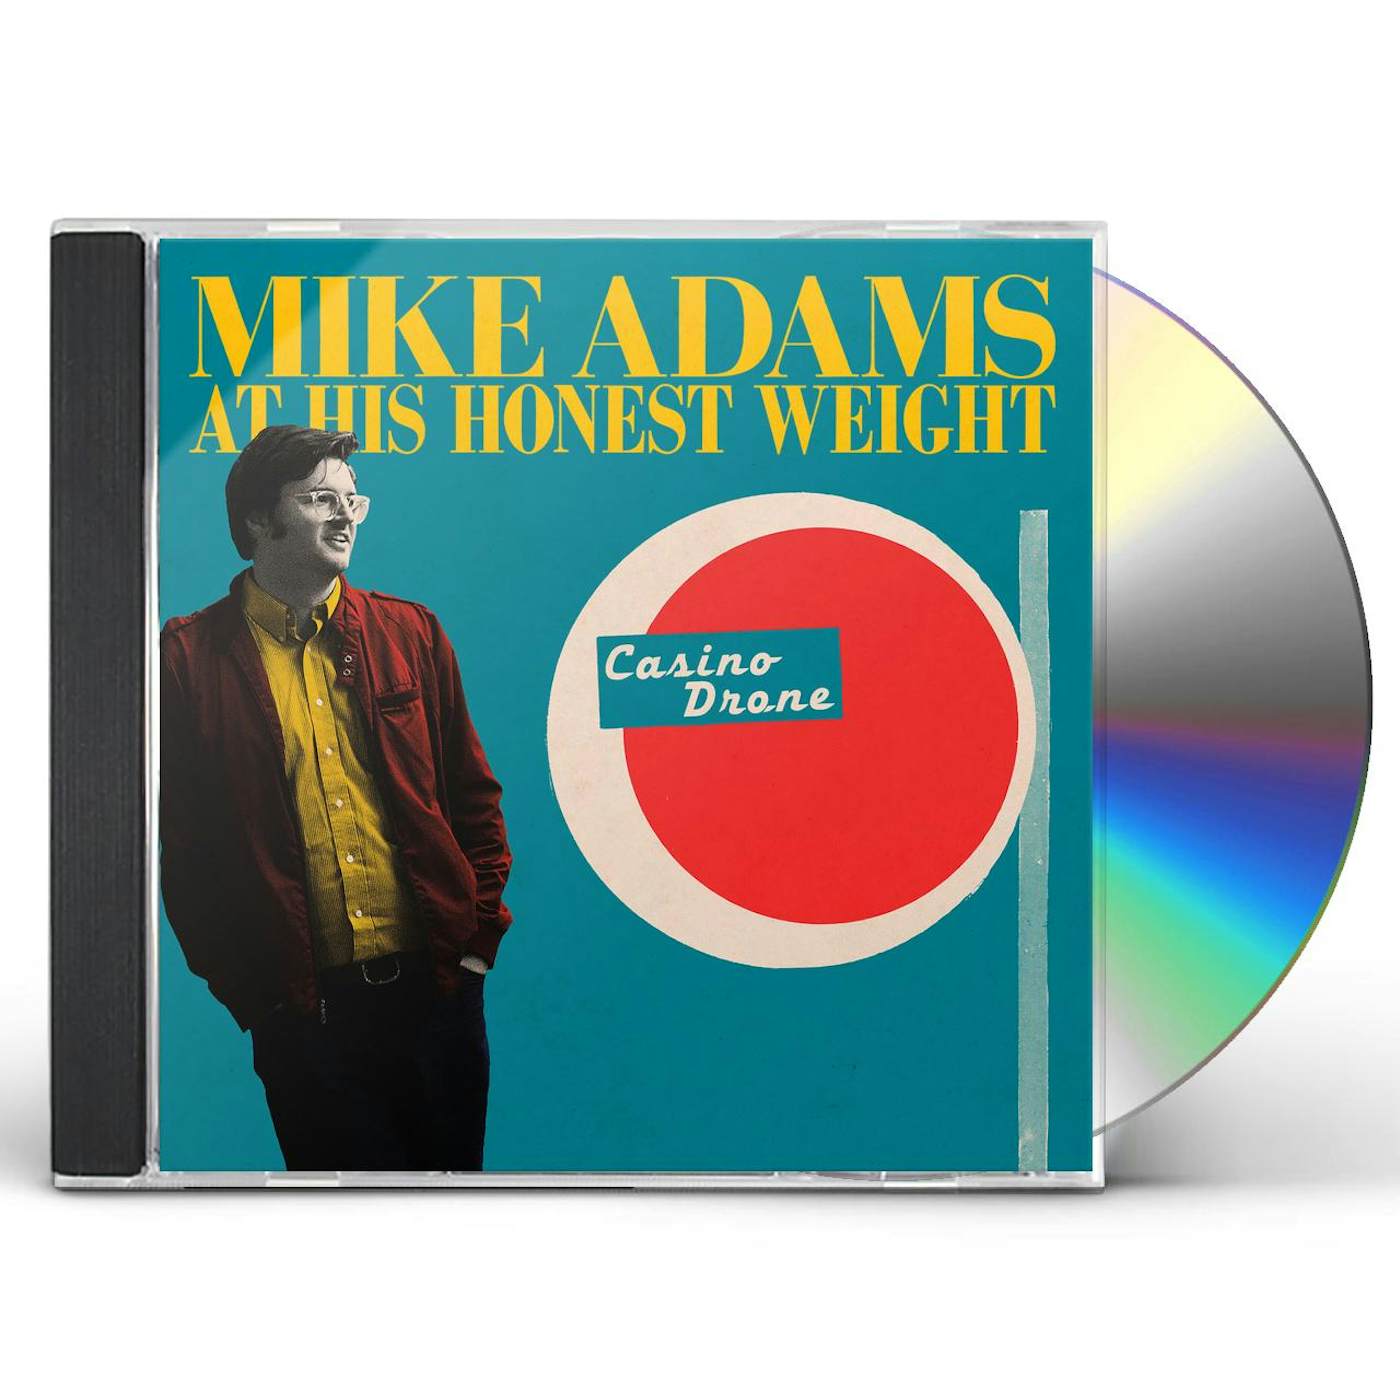 Mike Adams at His Honest Weight CASINO DRONE CD